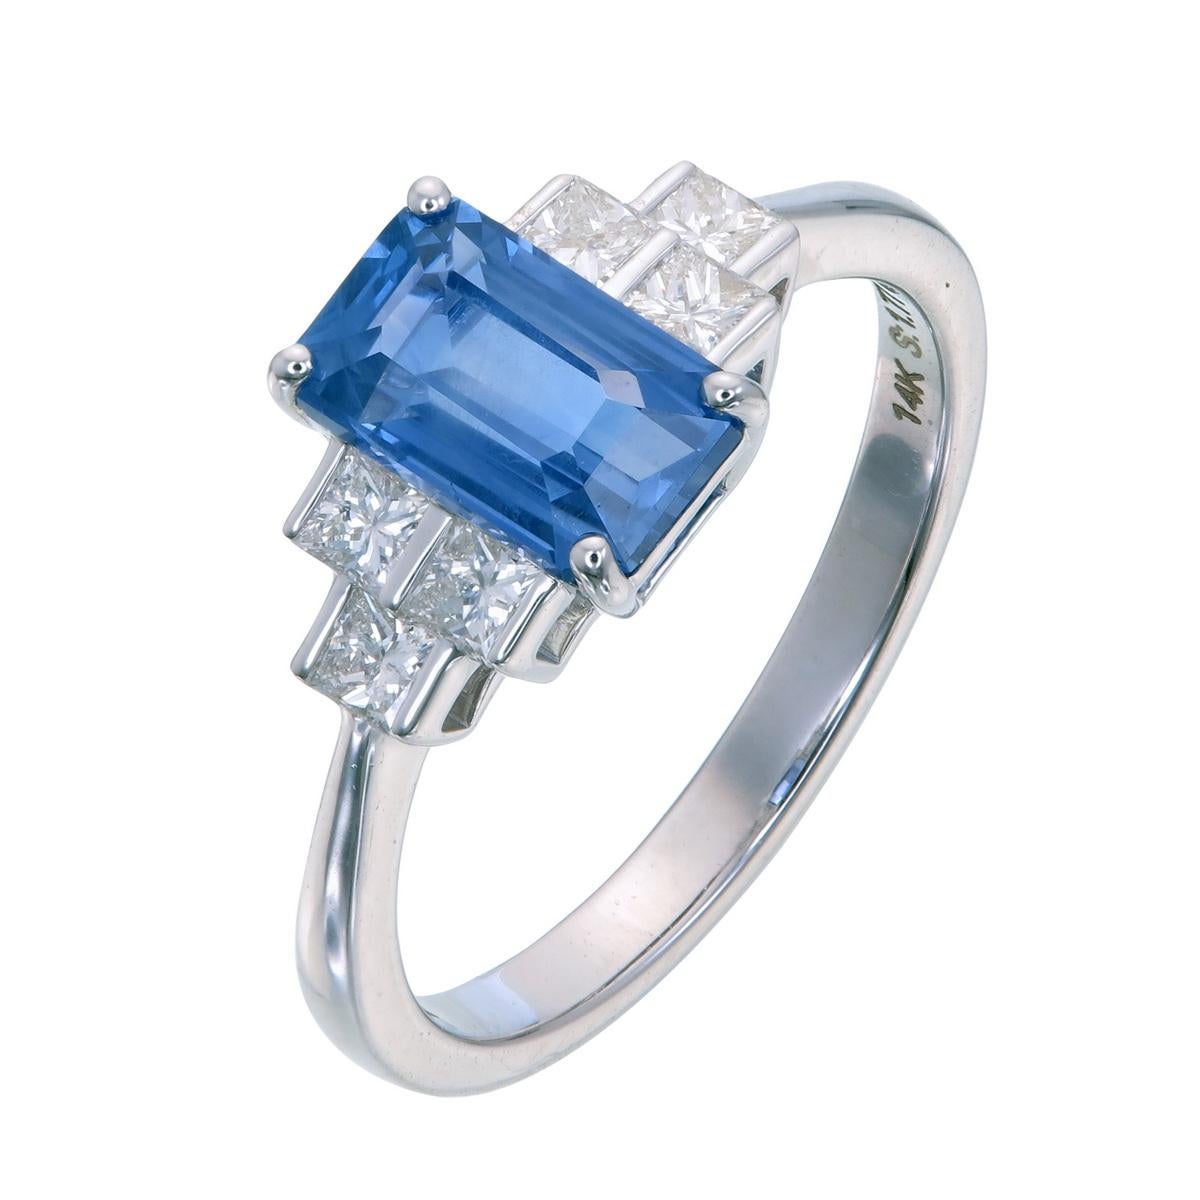 Wholesale! 1290 USD Certified unheated sapphire
Unheated Blue Sapphire Diamond Ring set in 14 Karat White Gold:
At the core of this ring sits a captivating 1.77 carat Ceylon sapphire, hailing from the fabled mines of Sri Lanka, completely exempt